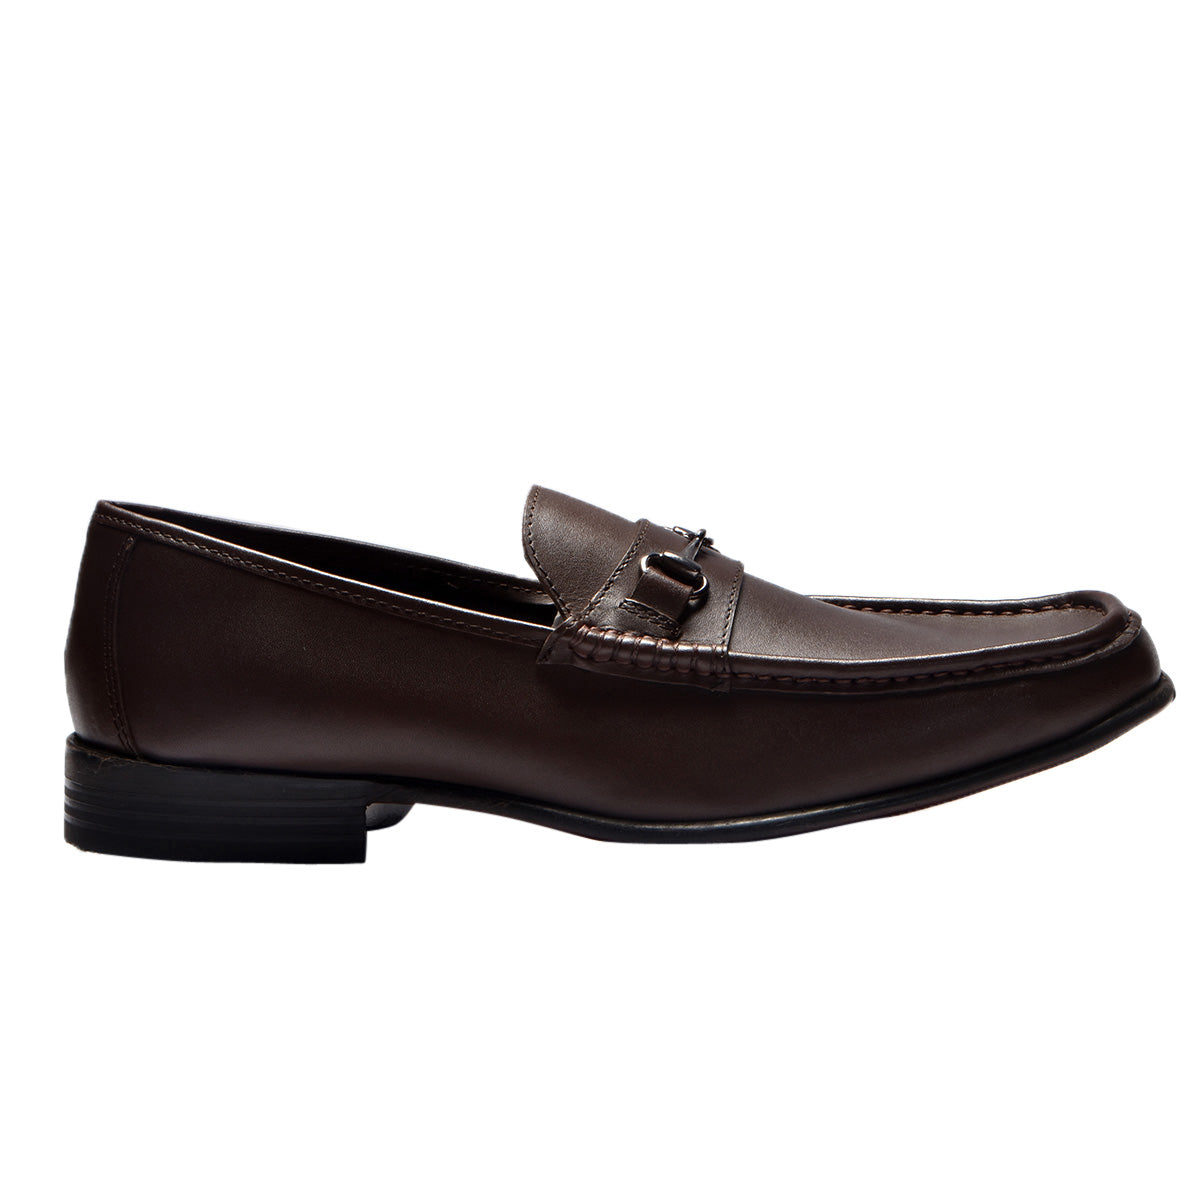 Men Leather Formal Loafers ǀ BORMAX  5058